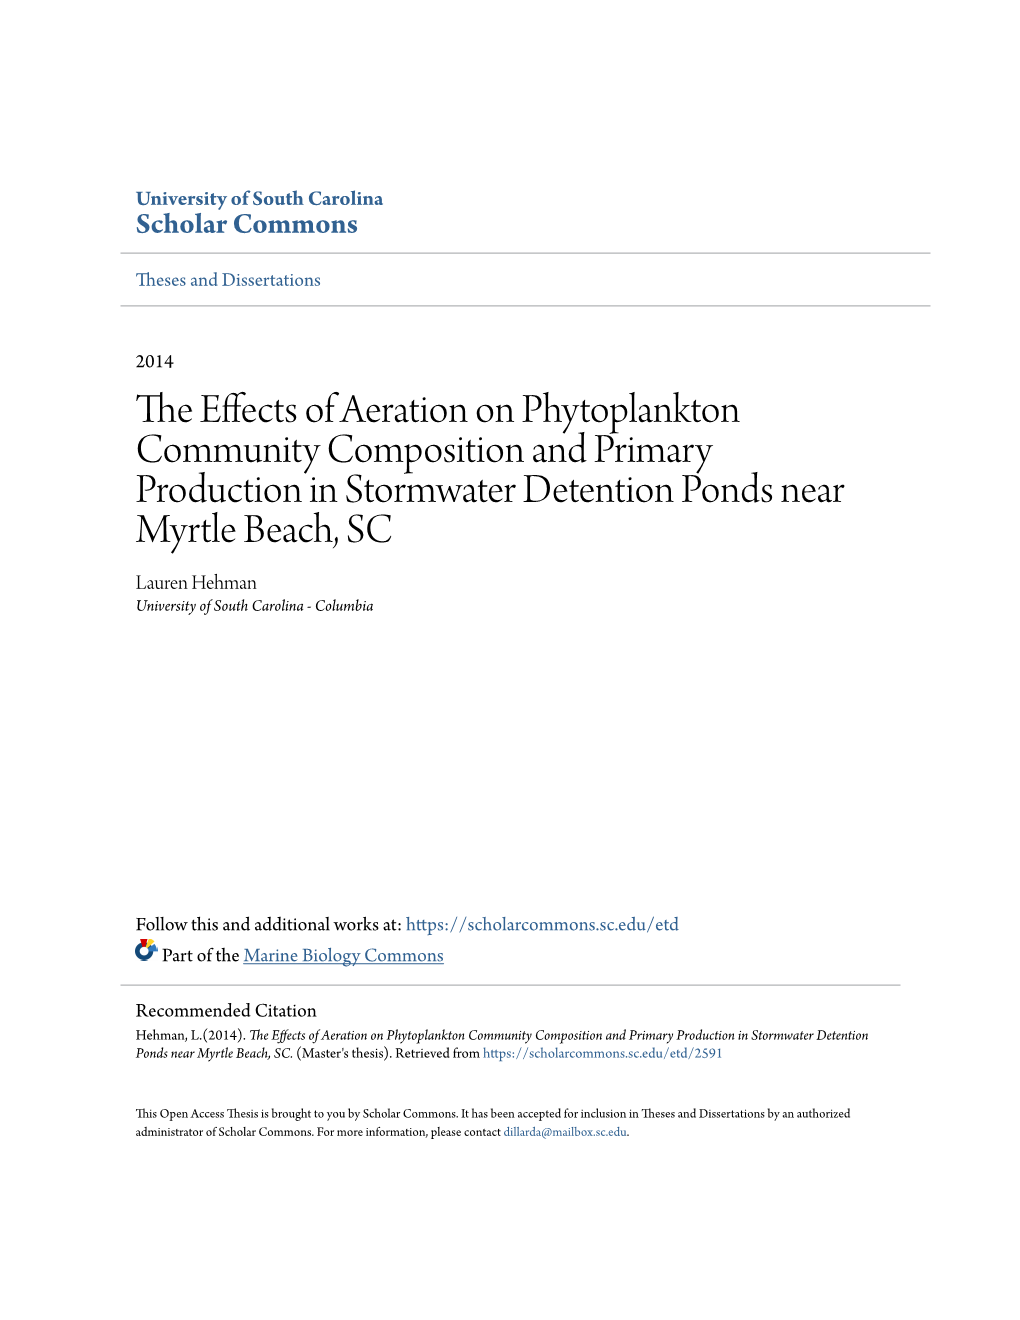 The Effects of Aeration on Phytoplankton Community Composition and Primary Production in Stormwater Detention Ponds Near Myrtle Beach, SC